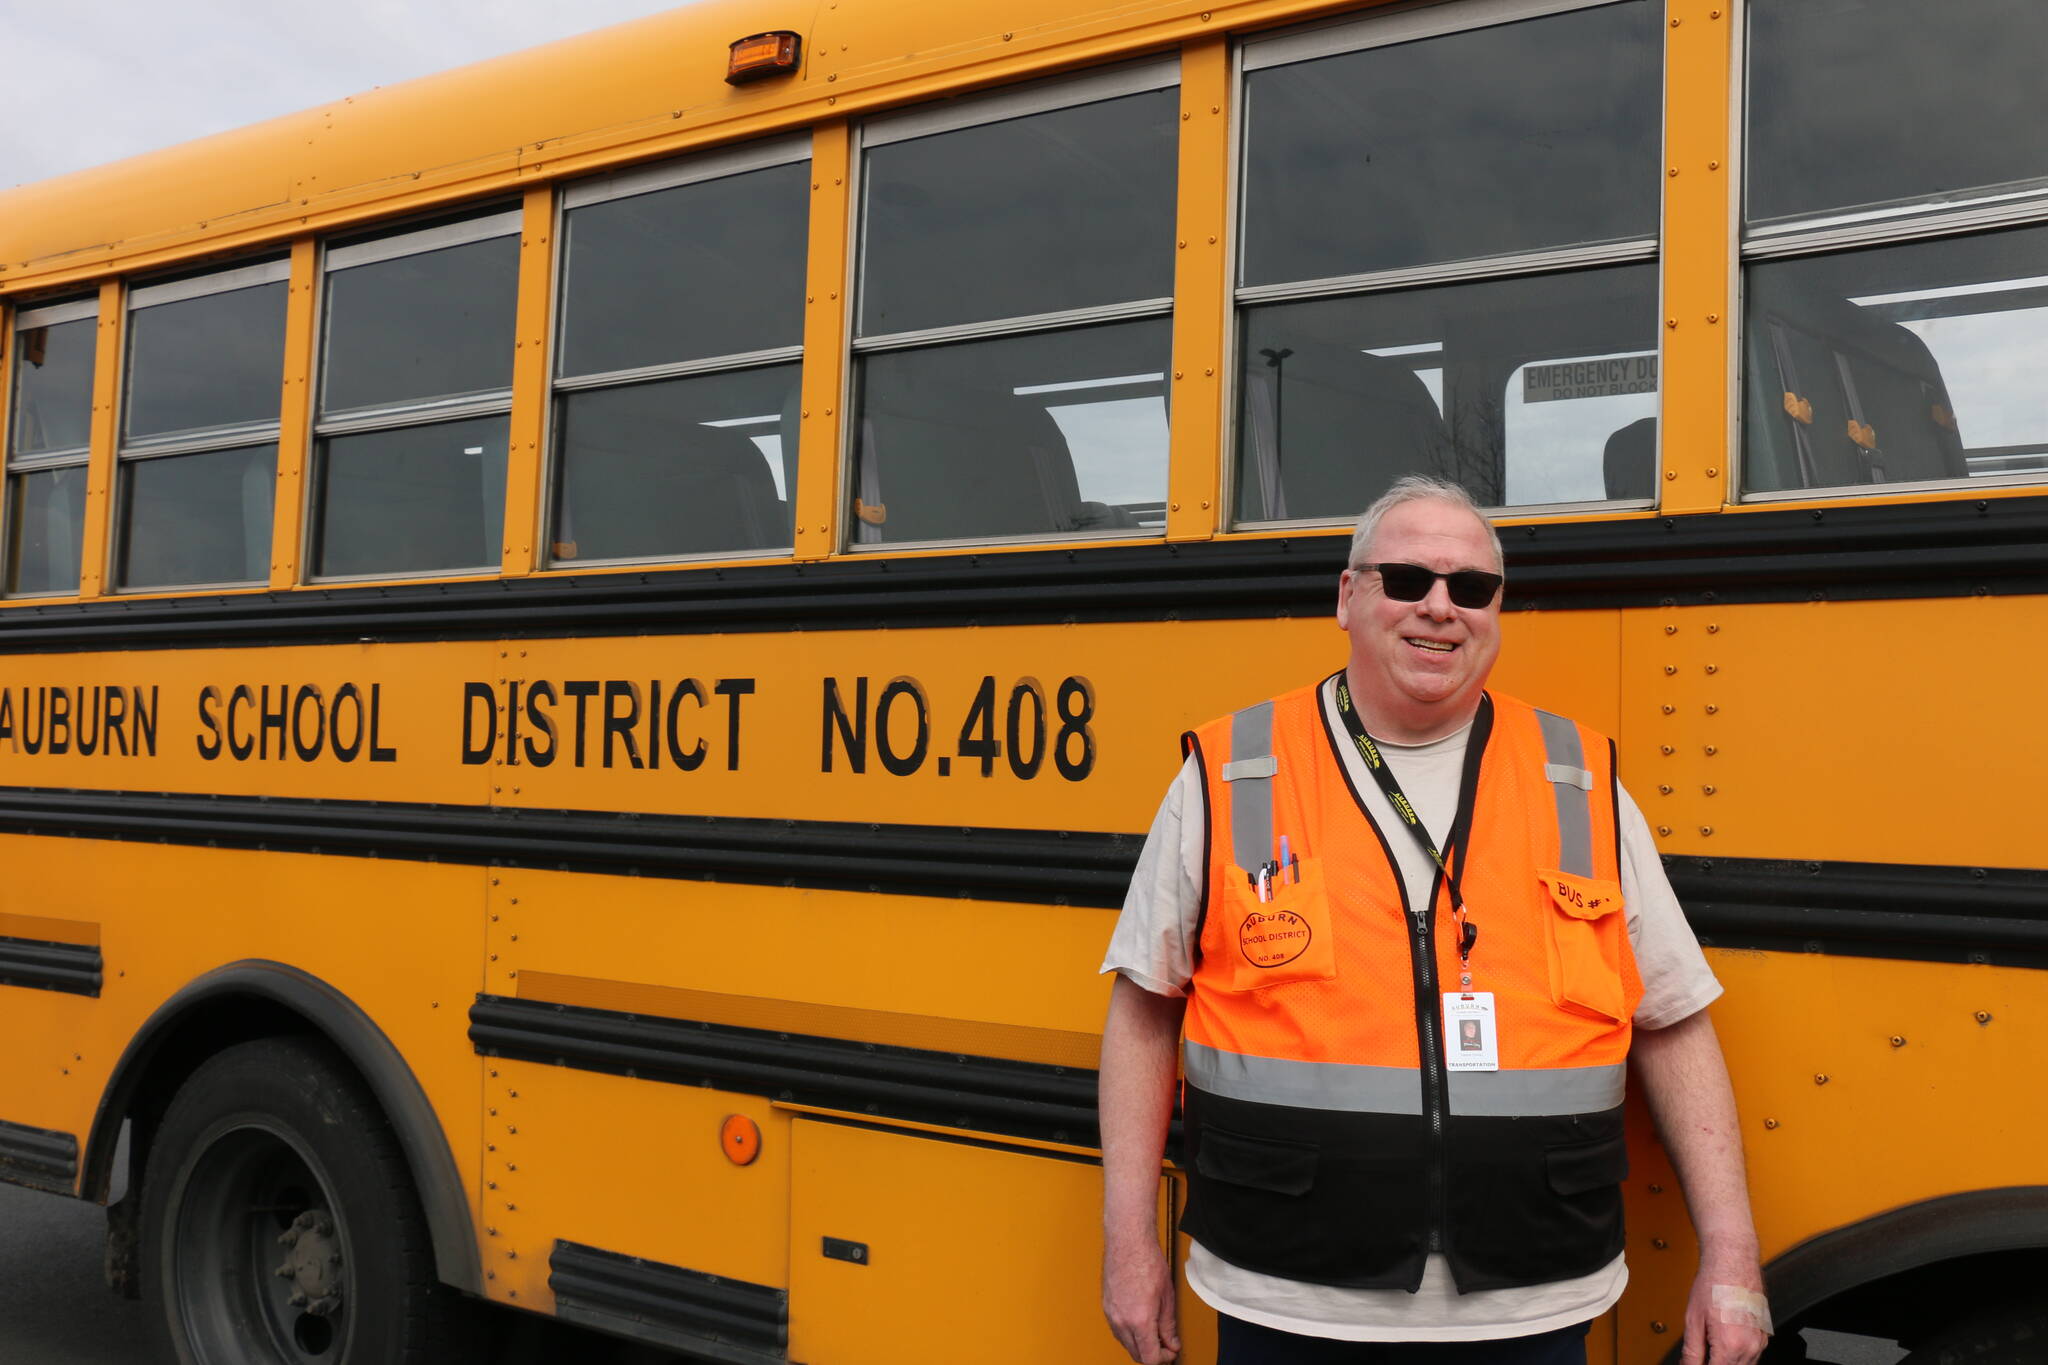 Photo courtesy of the Auburn School District
Deane Davies and his school bus.